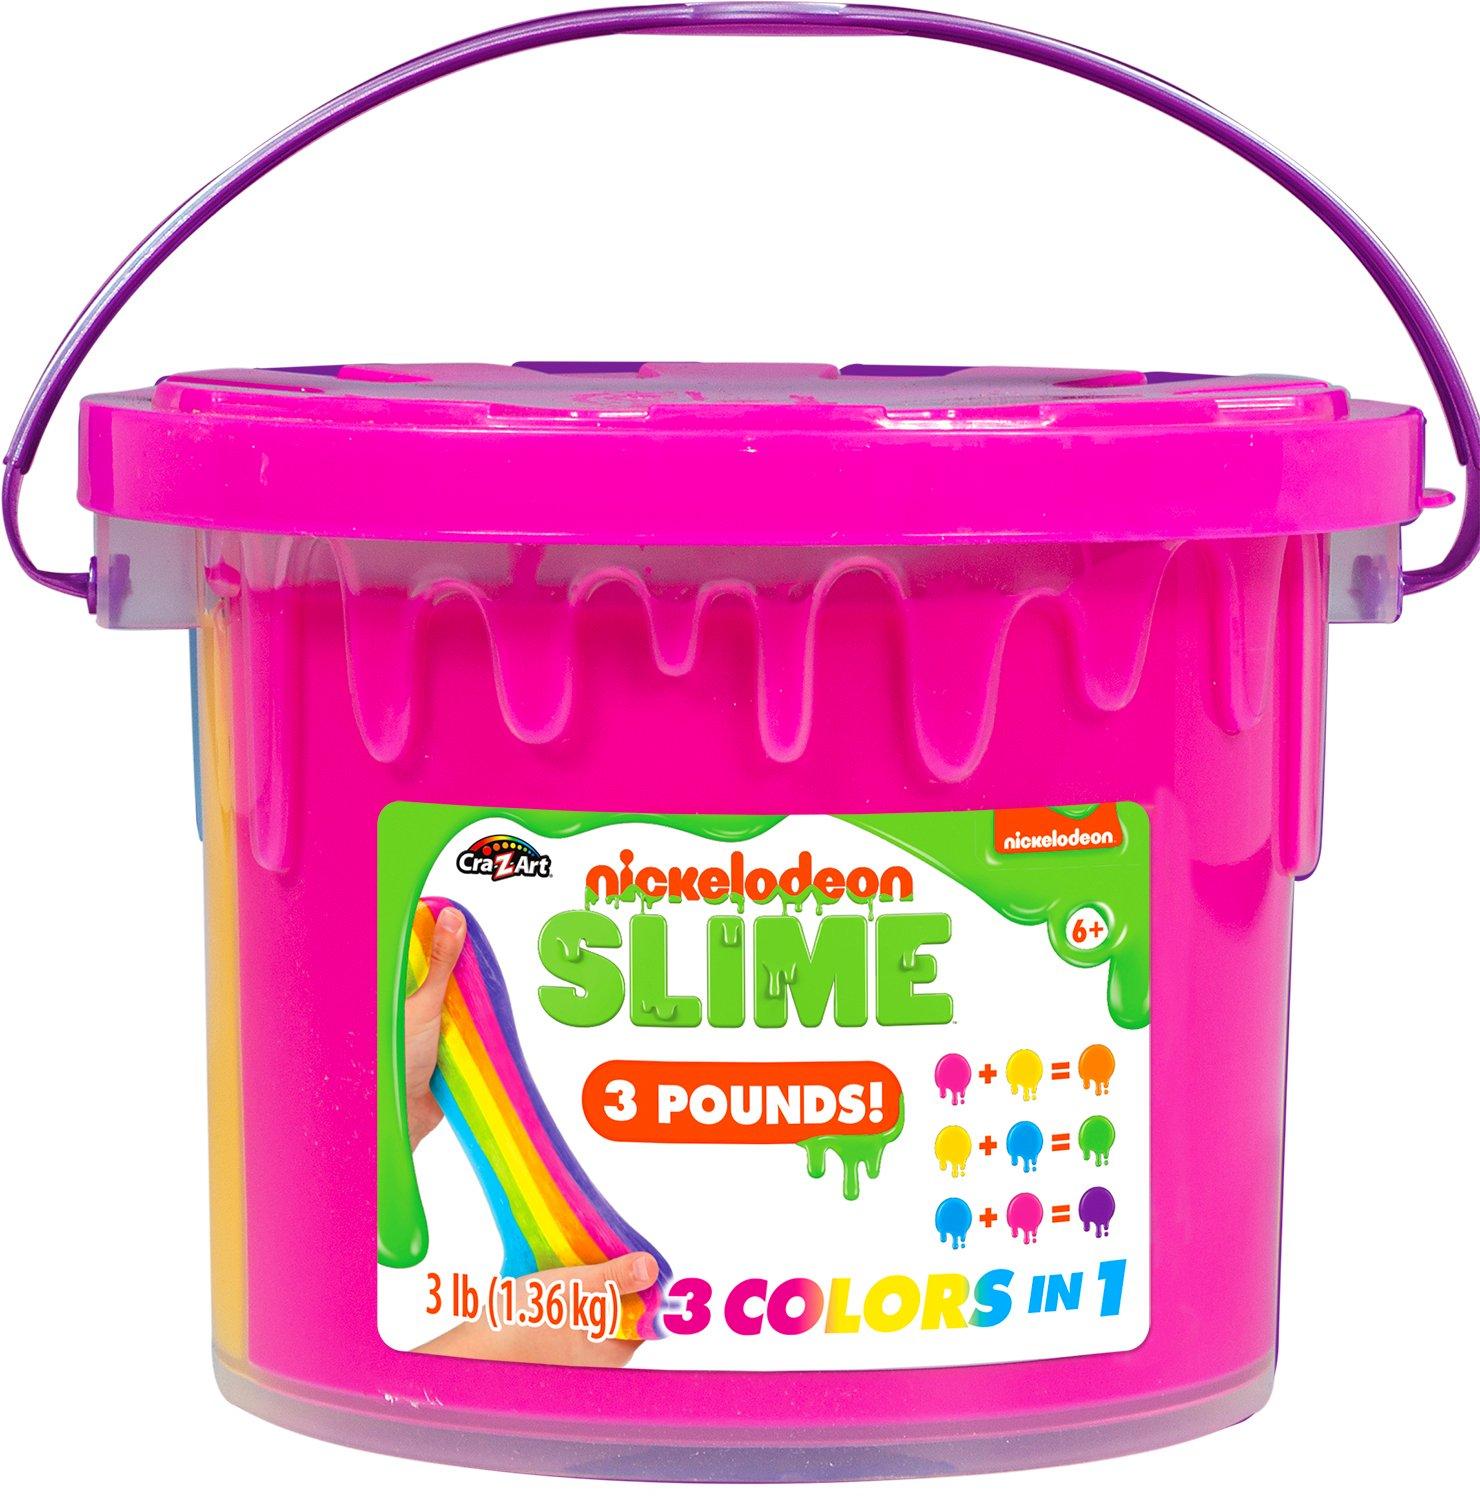 Vanilla and Chocolate Colored Slime 3 Colors-in-1 Strawberry Nickelodeon Slime 3LB Ice Cream Premade Slime Bucket 